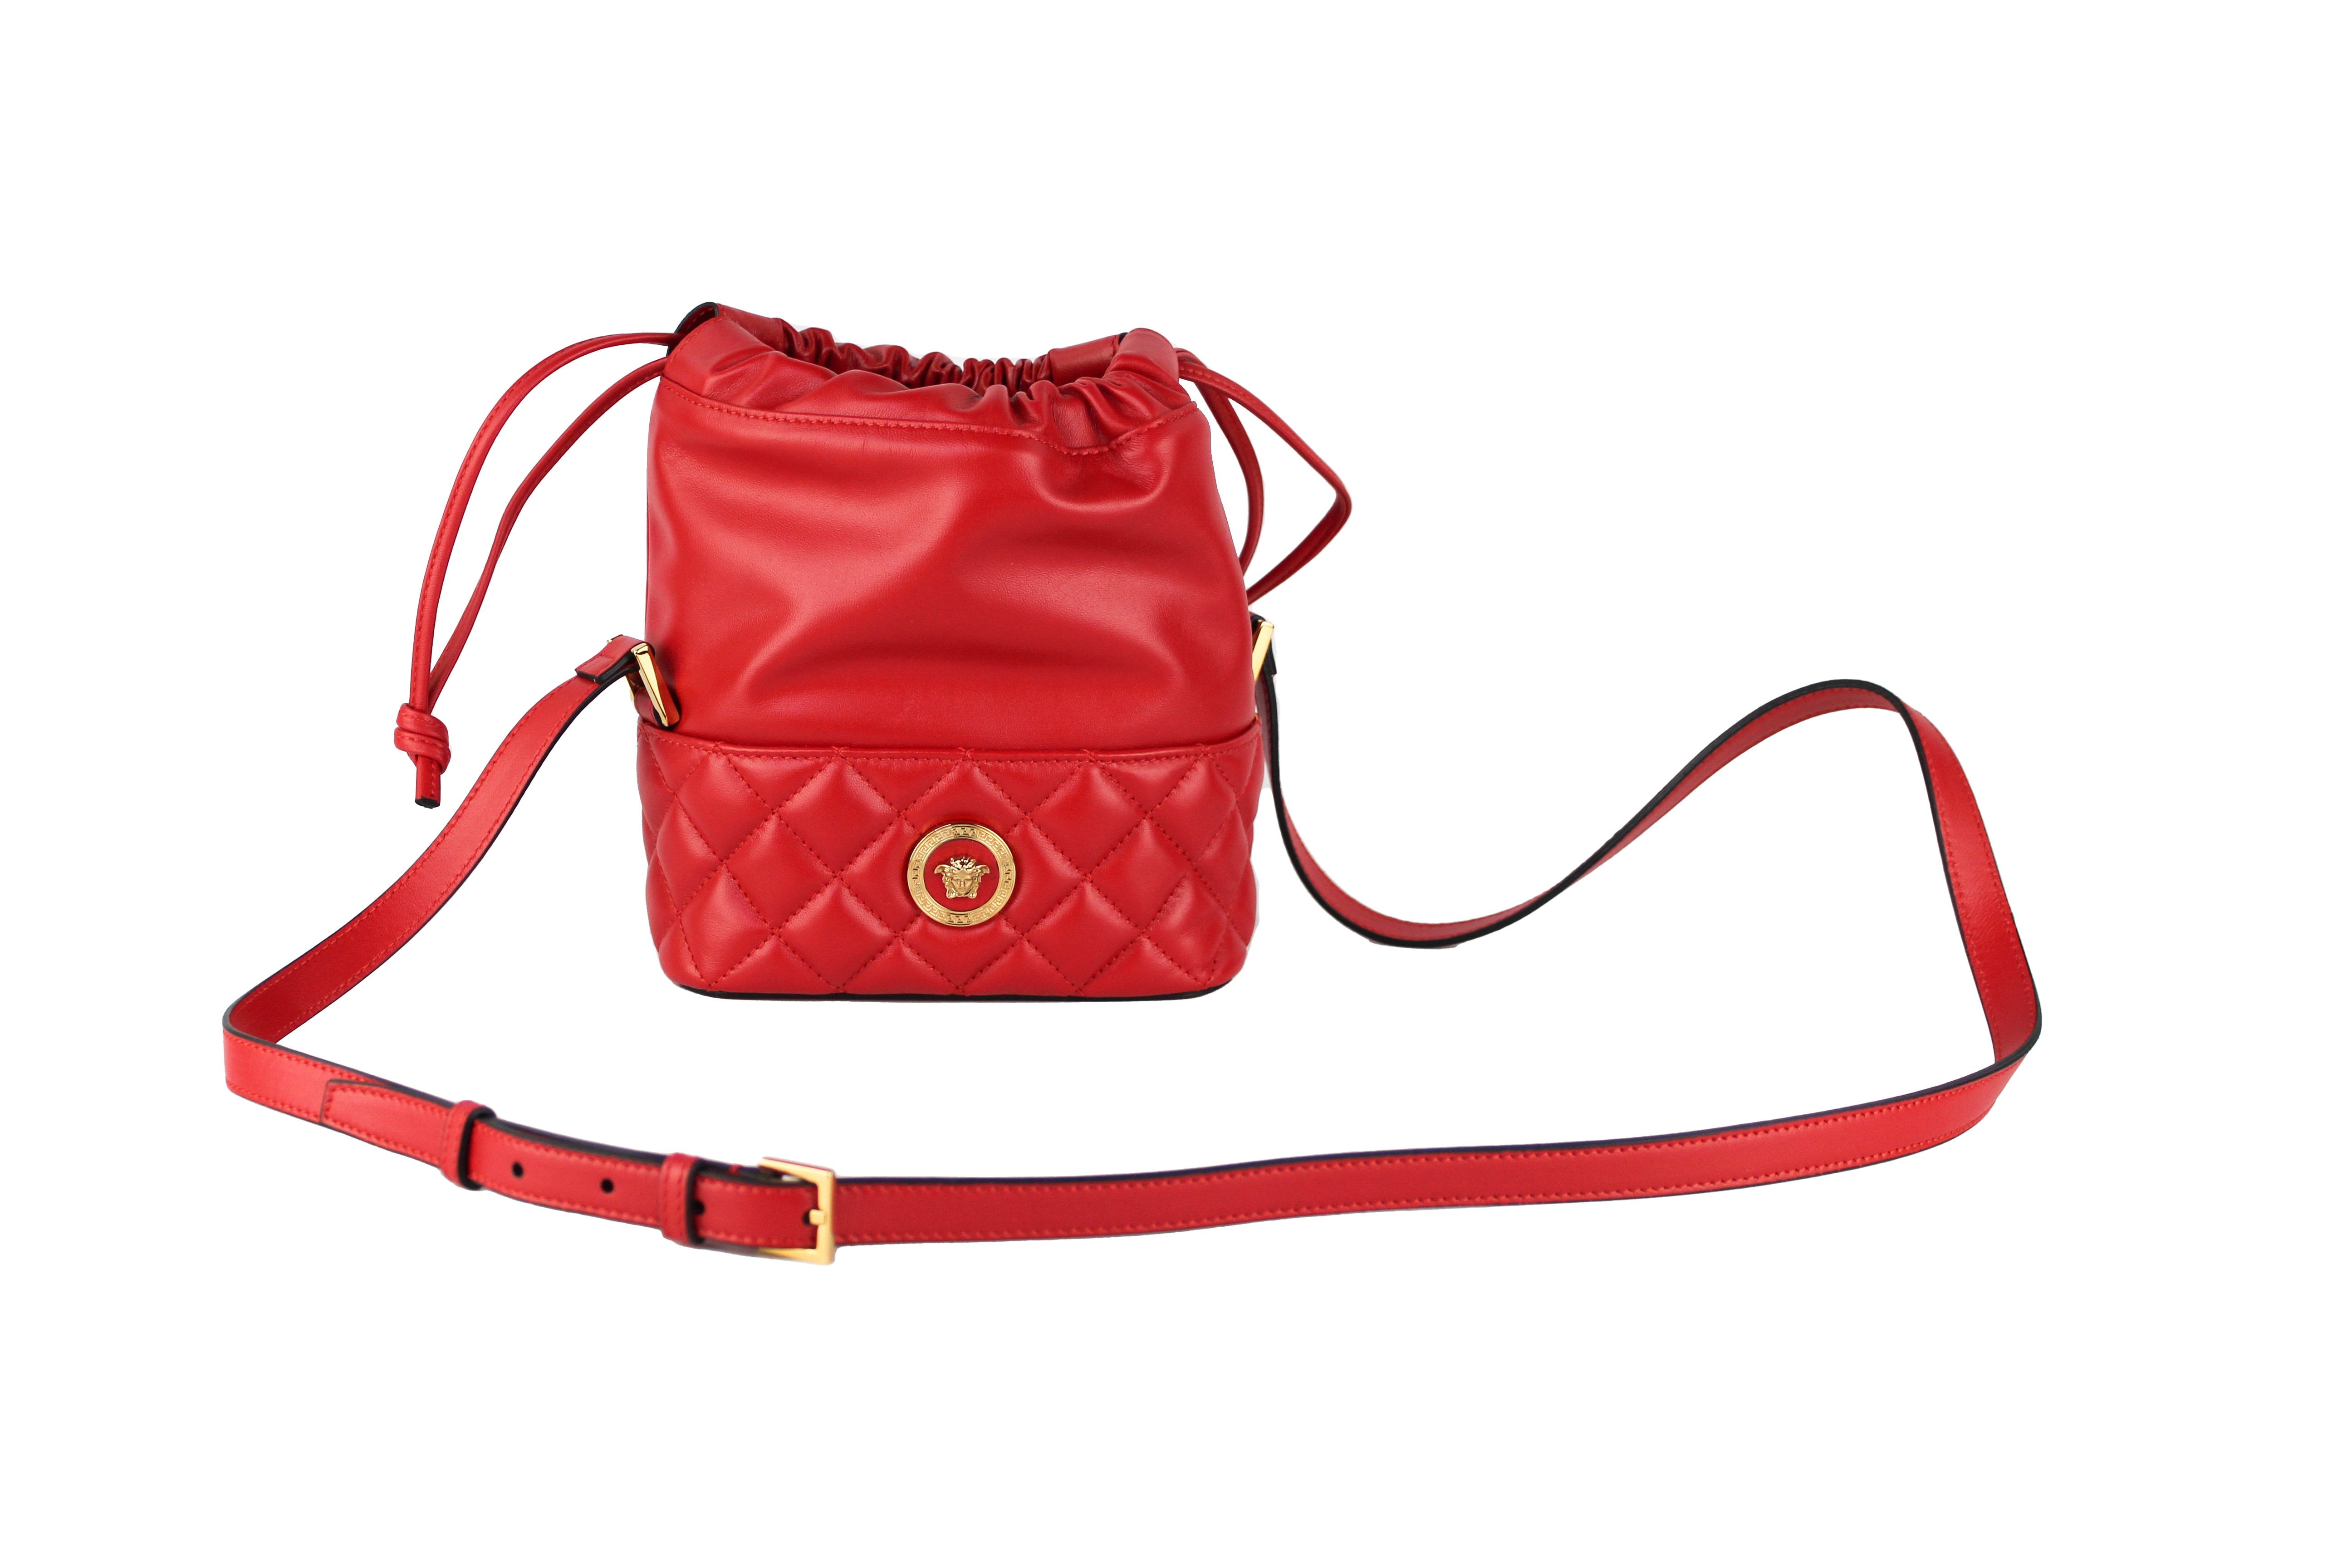 Versace Quilted Leather Crossbody Bag